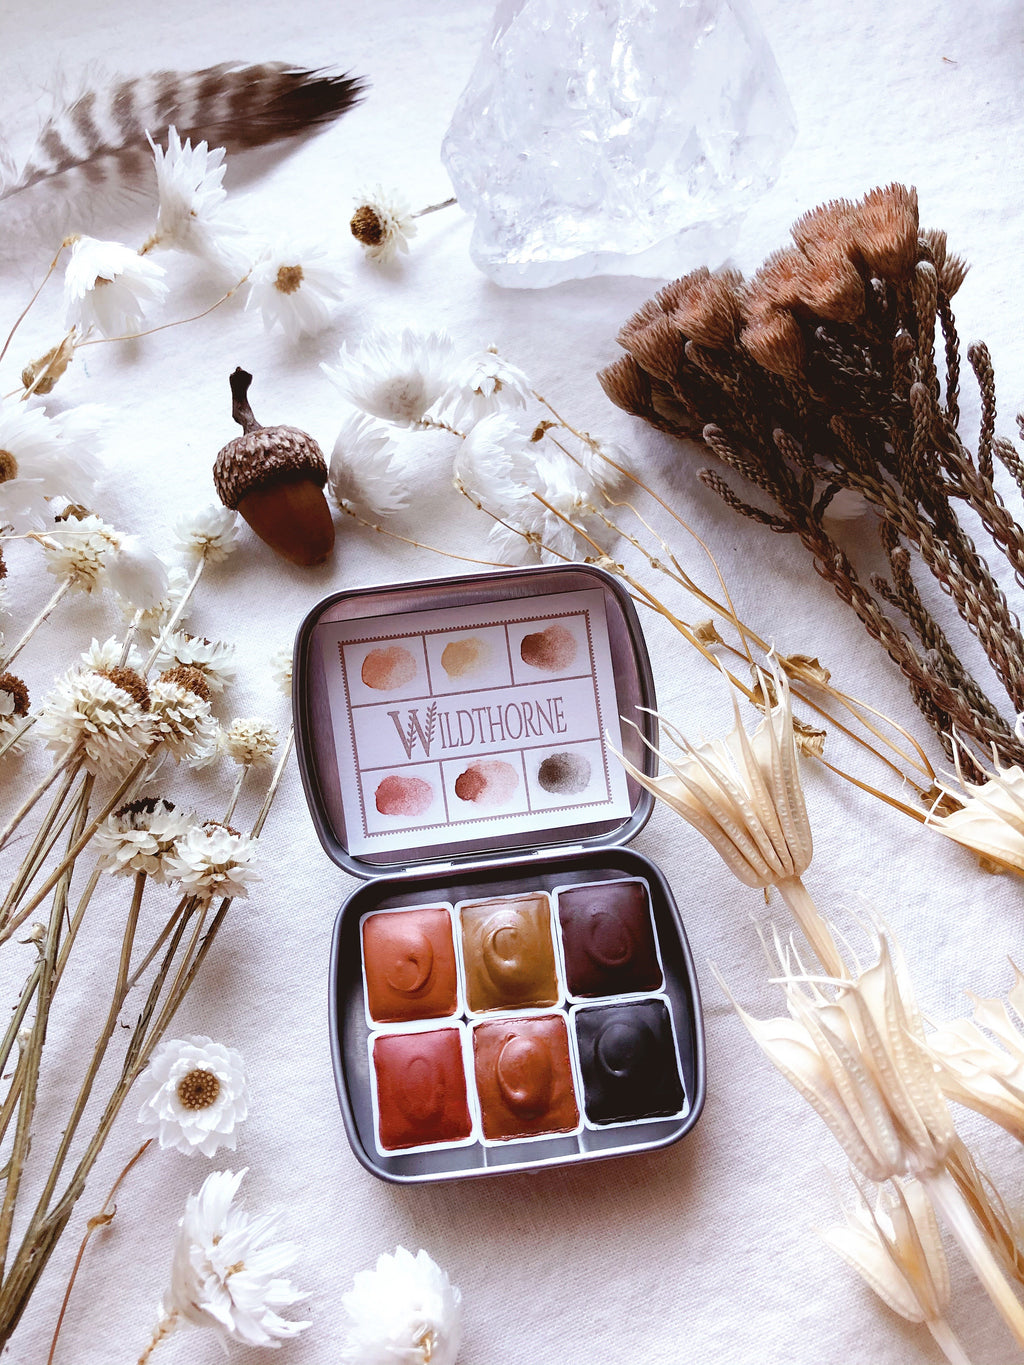 RESERVE for Zane + Desert Medicine - “Being You” - Limited edition Mineral watercolor palette